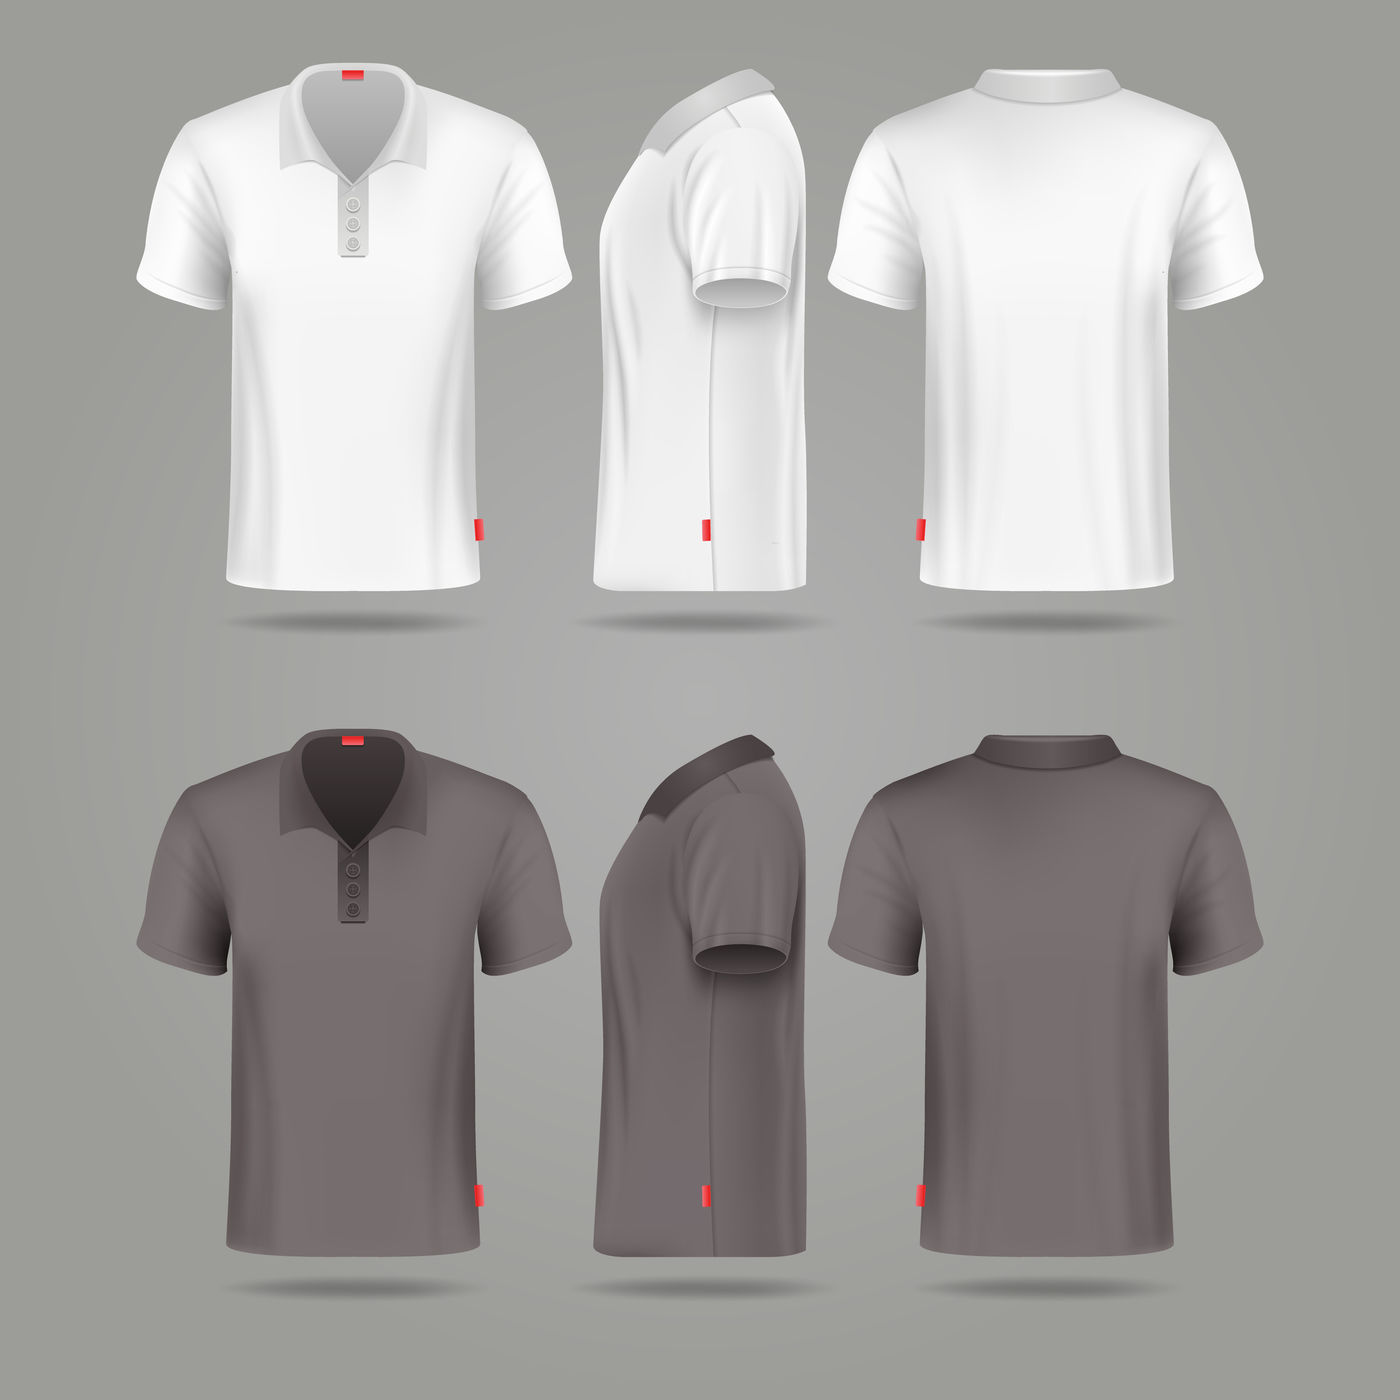 Download Polo Shirt Mockup Psd Front And Back - Free Mockups | PSD Template | Design Assets